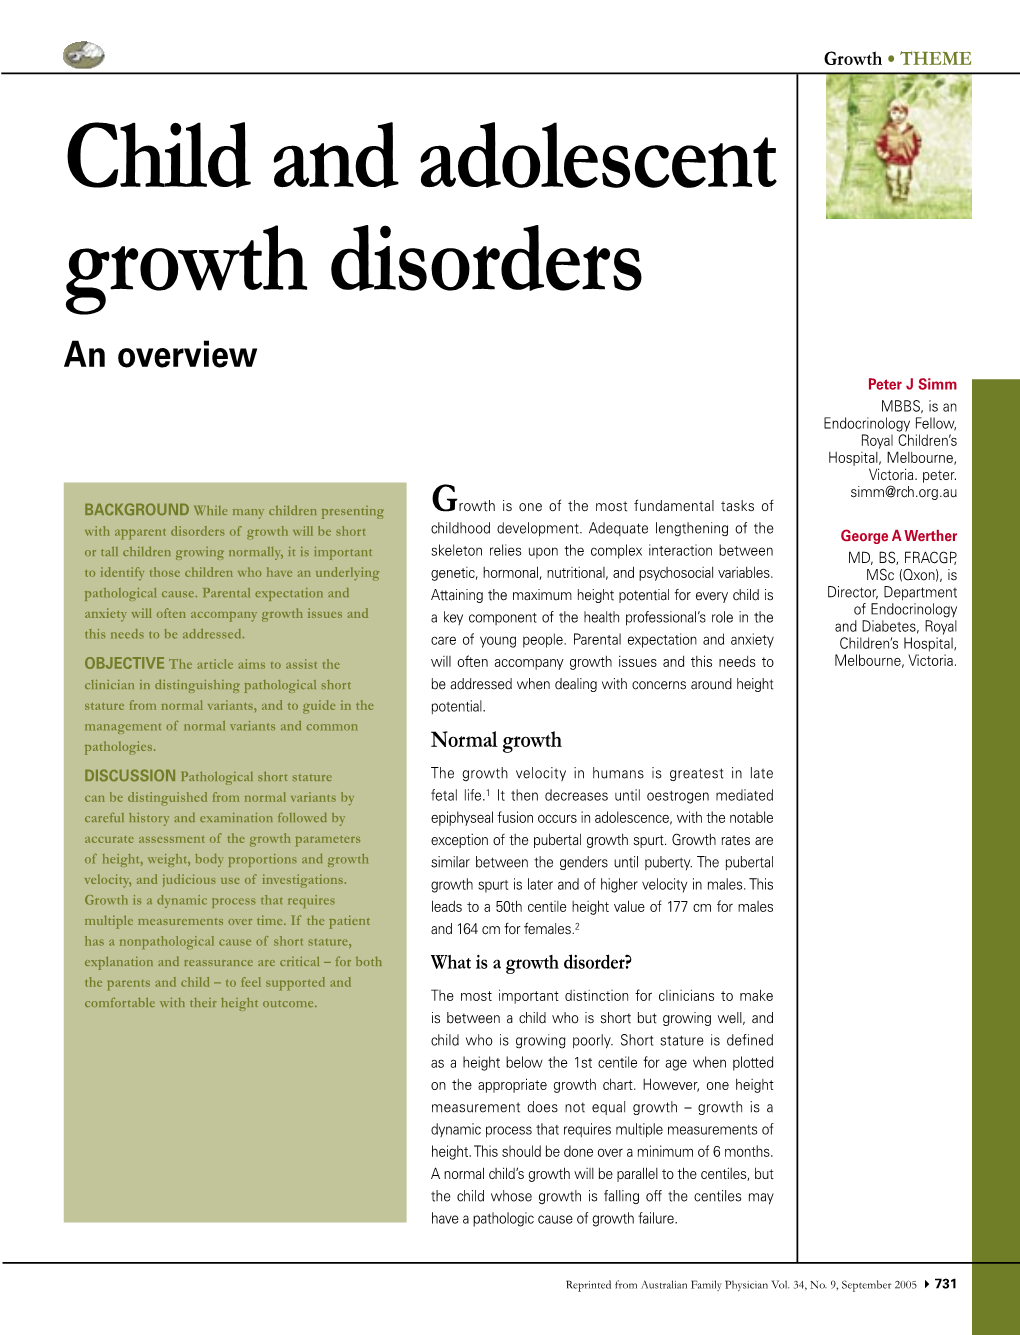 Child and Adolescent Growth Disorders an Overview Peter J Simm MBBS, Is an Endocrinology Fellow, Royal Children’S Hospital, Melbourne, Victoria